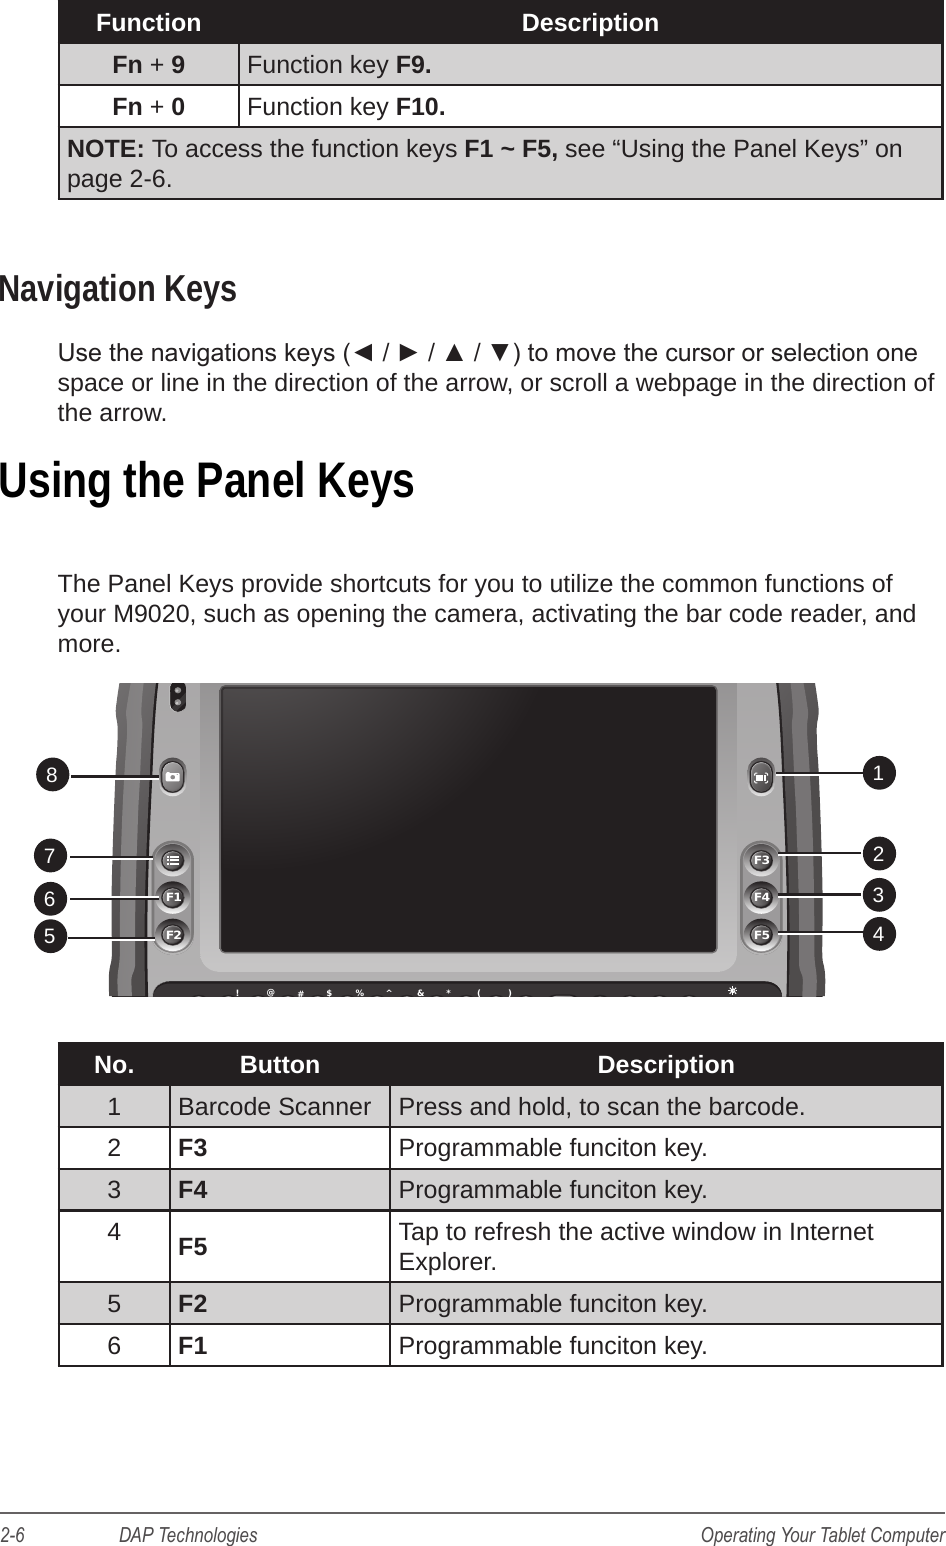 2-6                    DAP Technologies Operating Your Tablet ComputerFunction DescriptionFn + 9Function key F9.Fn + 0Function key F10.NOTE: To access the function keys F1 ~ F5, see “Using the Panel Keys” on page 2-6. Navigation KeysUse the navigations keys (◄ / ► / ▲ / ▼) to move the cursor or selection one space or line in the direction of the arrow, or scroll a webpage in the direction of the arrow.Using the Panel KeysThe Panel Keys provide shortcuts for you to utilize the common functions of your M9020, such as opening the camera, activating the bar code reader, and more.EscTabCtrlQAZXCVBNM0123456789AltShiftSDFGHJKLEnterSpaceDel Fn,.WERTYUIOP!@-=#$%^&amp; *(?&gt;][}{)|;\:“‘ ~`F1F2F4F3F526781534No. Button Description1 Barcode Scanner Press and hold, to scan the barcode.2F3 Programmable funciton key.3F4 Programmable funciton key. 4F5 Tap to refresh the active window in Internet Explorer.5F2 Programmable funciton key. 6F1 Programmable funciton key.